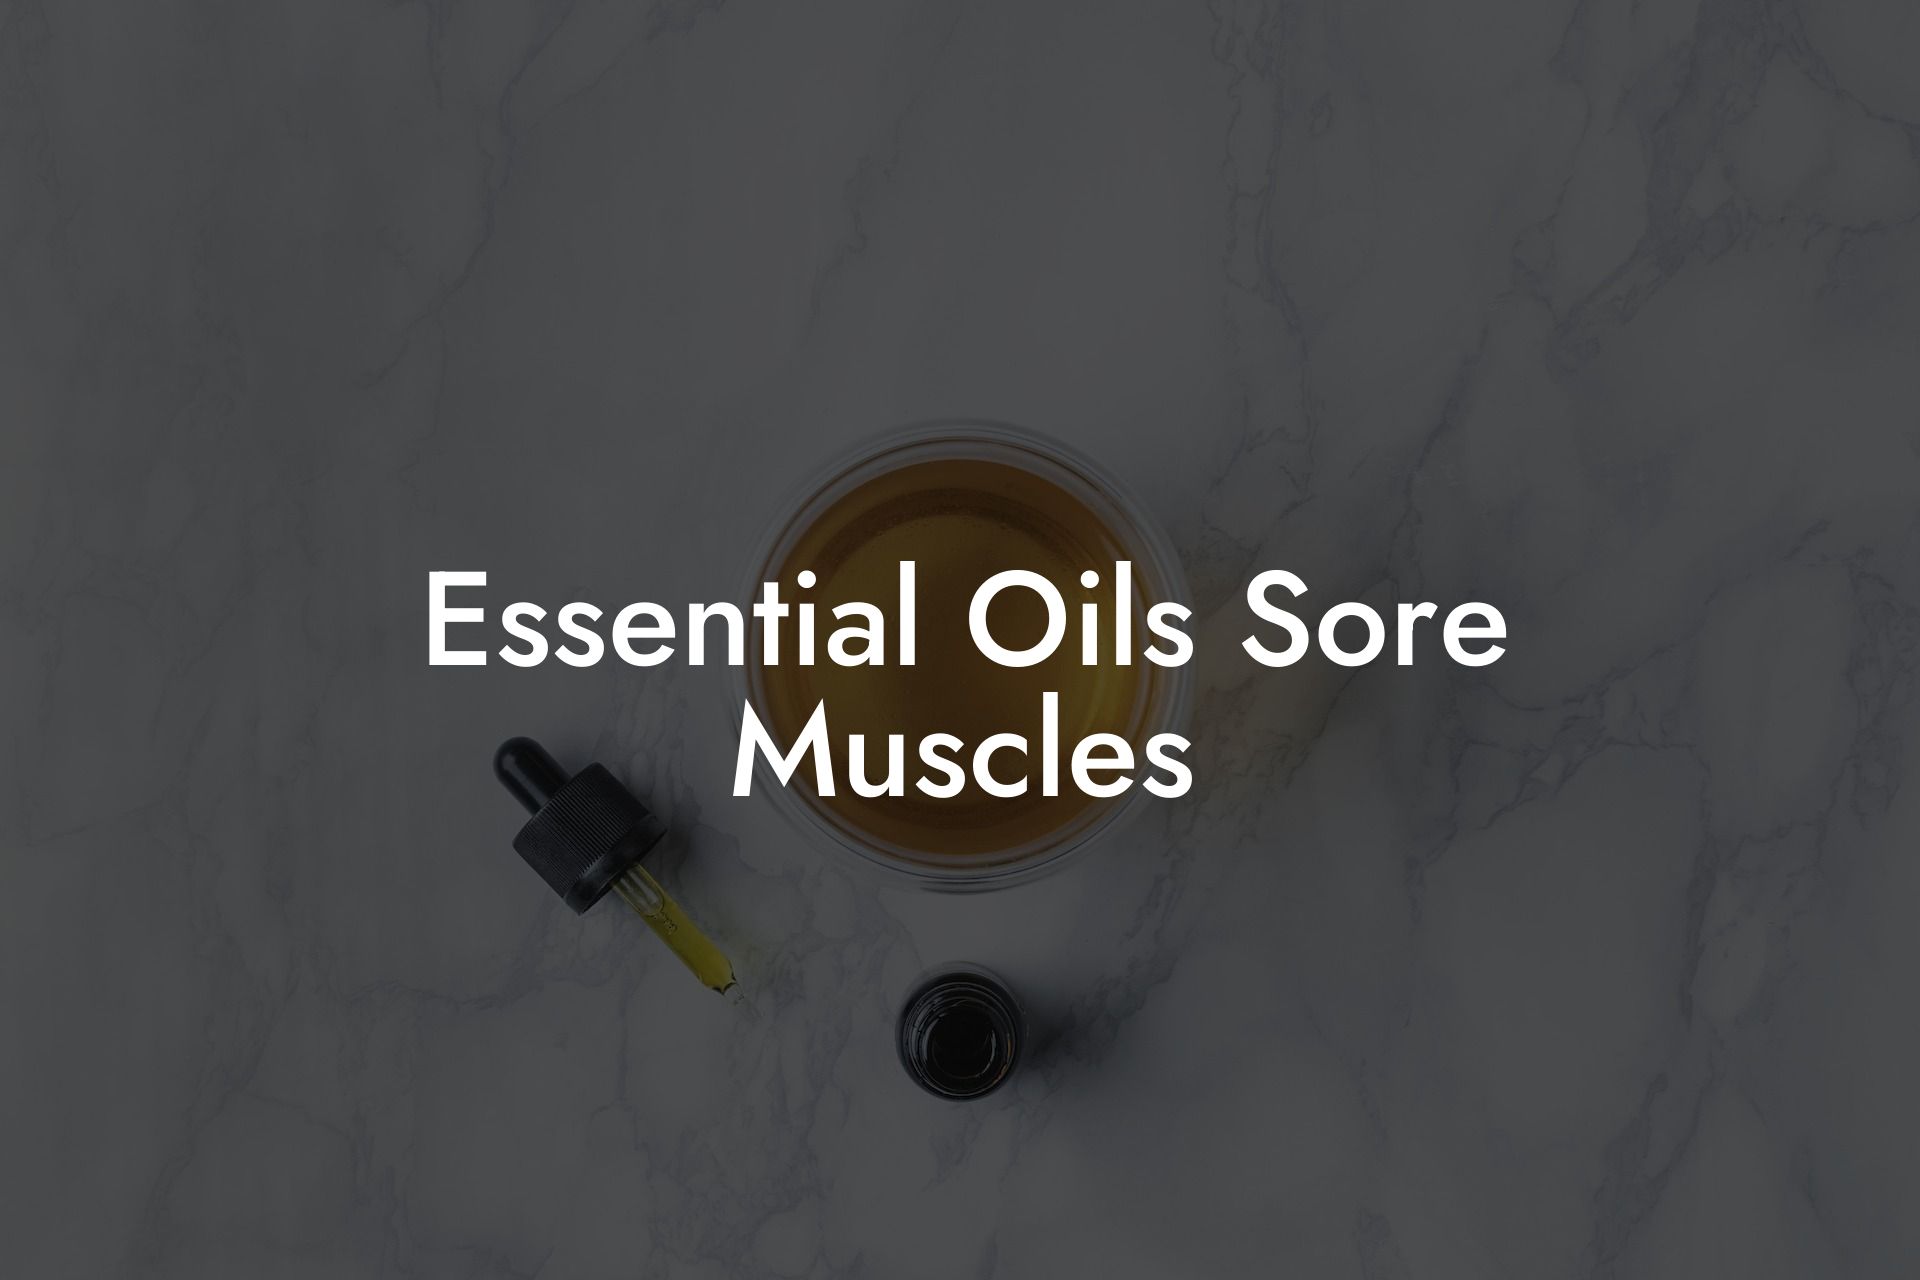 Essential Oils Sore Muscles